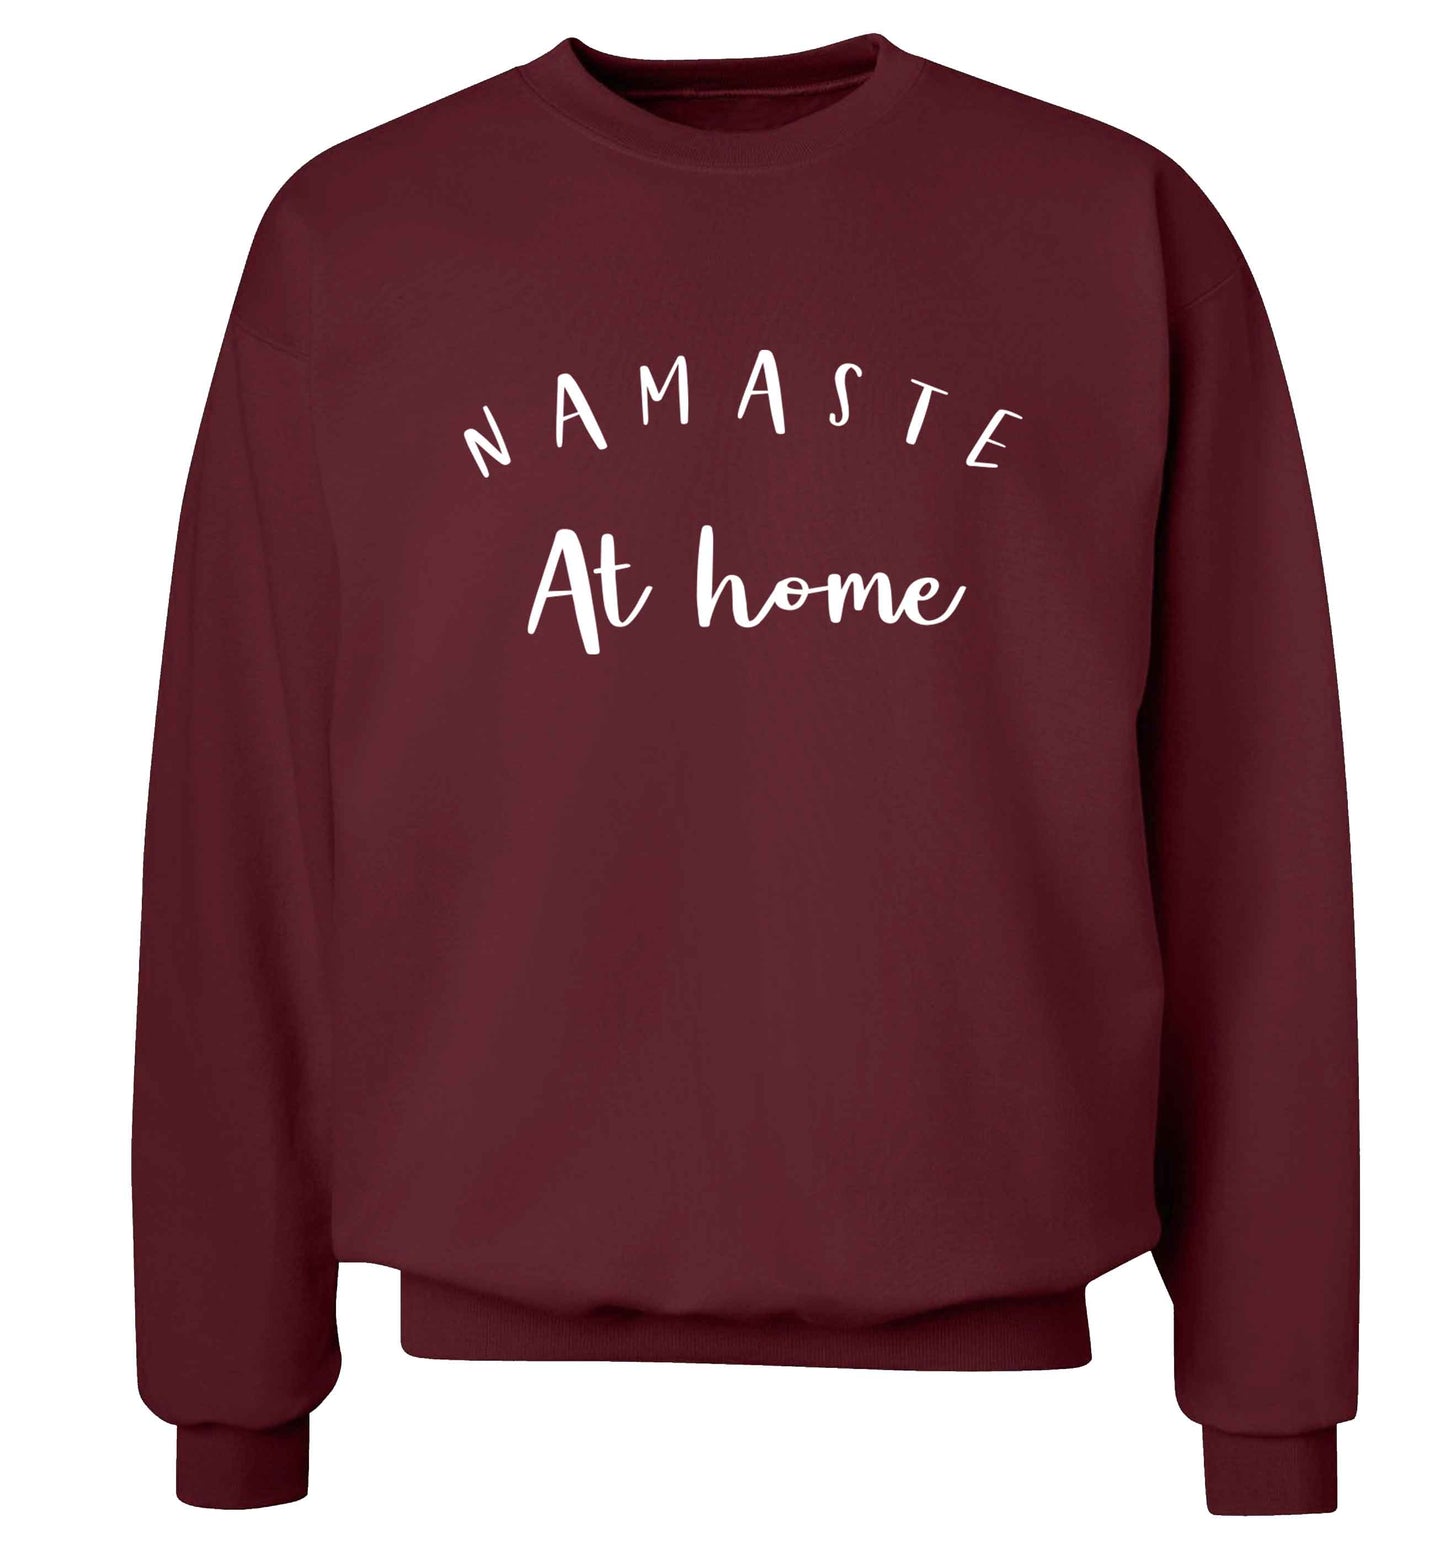 Namaste at home Adult's unisex maroon Sweater 2XL